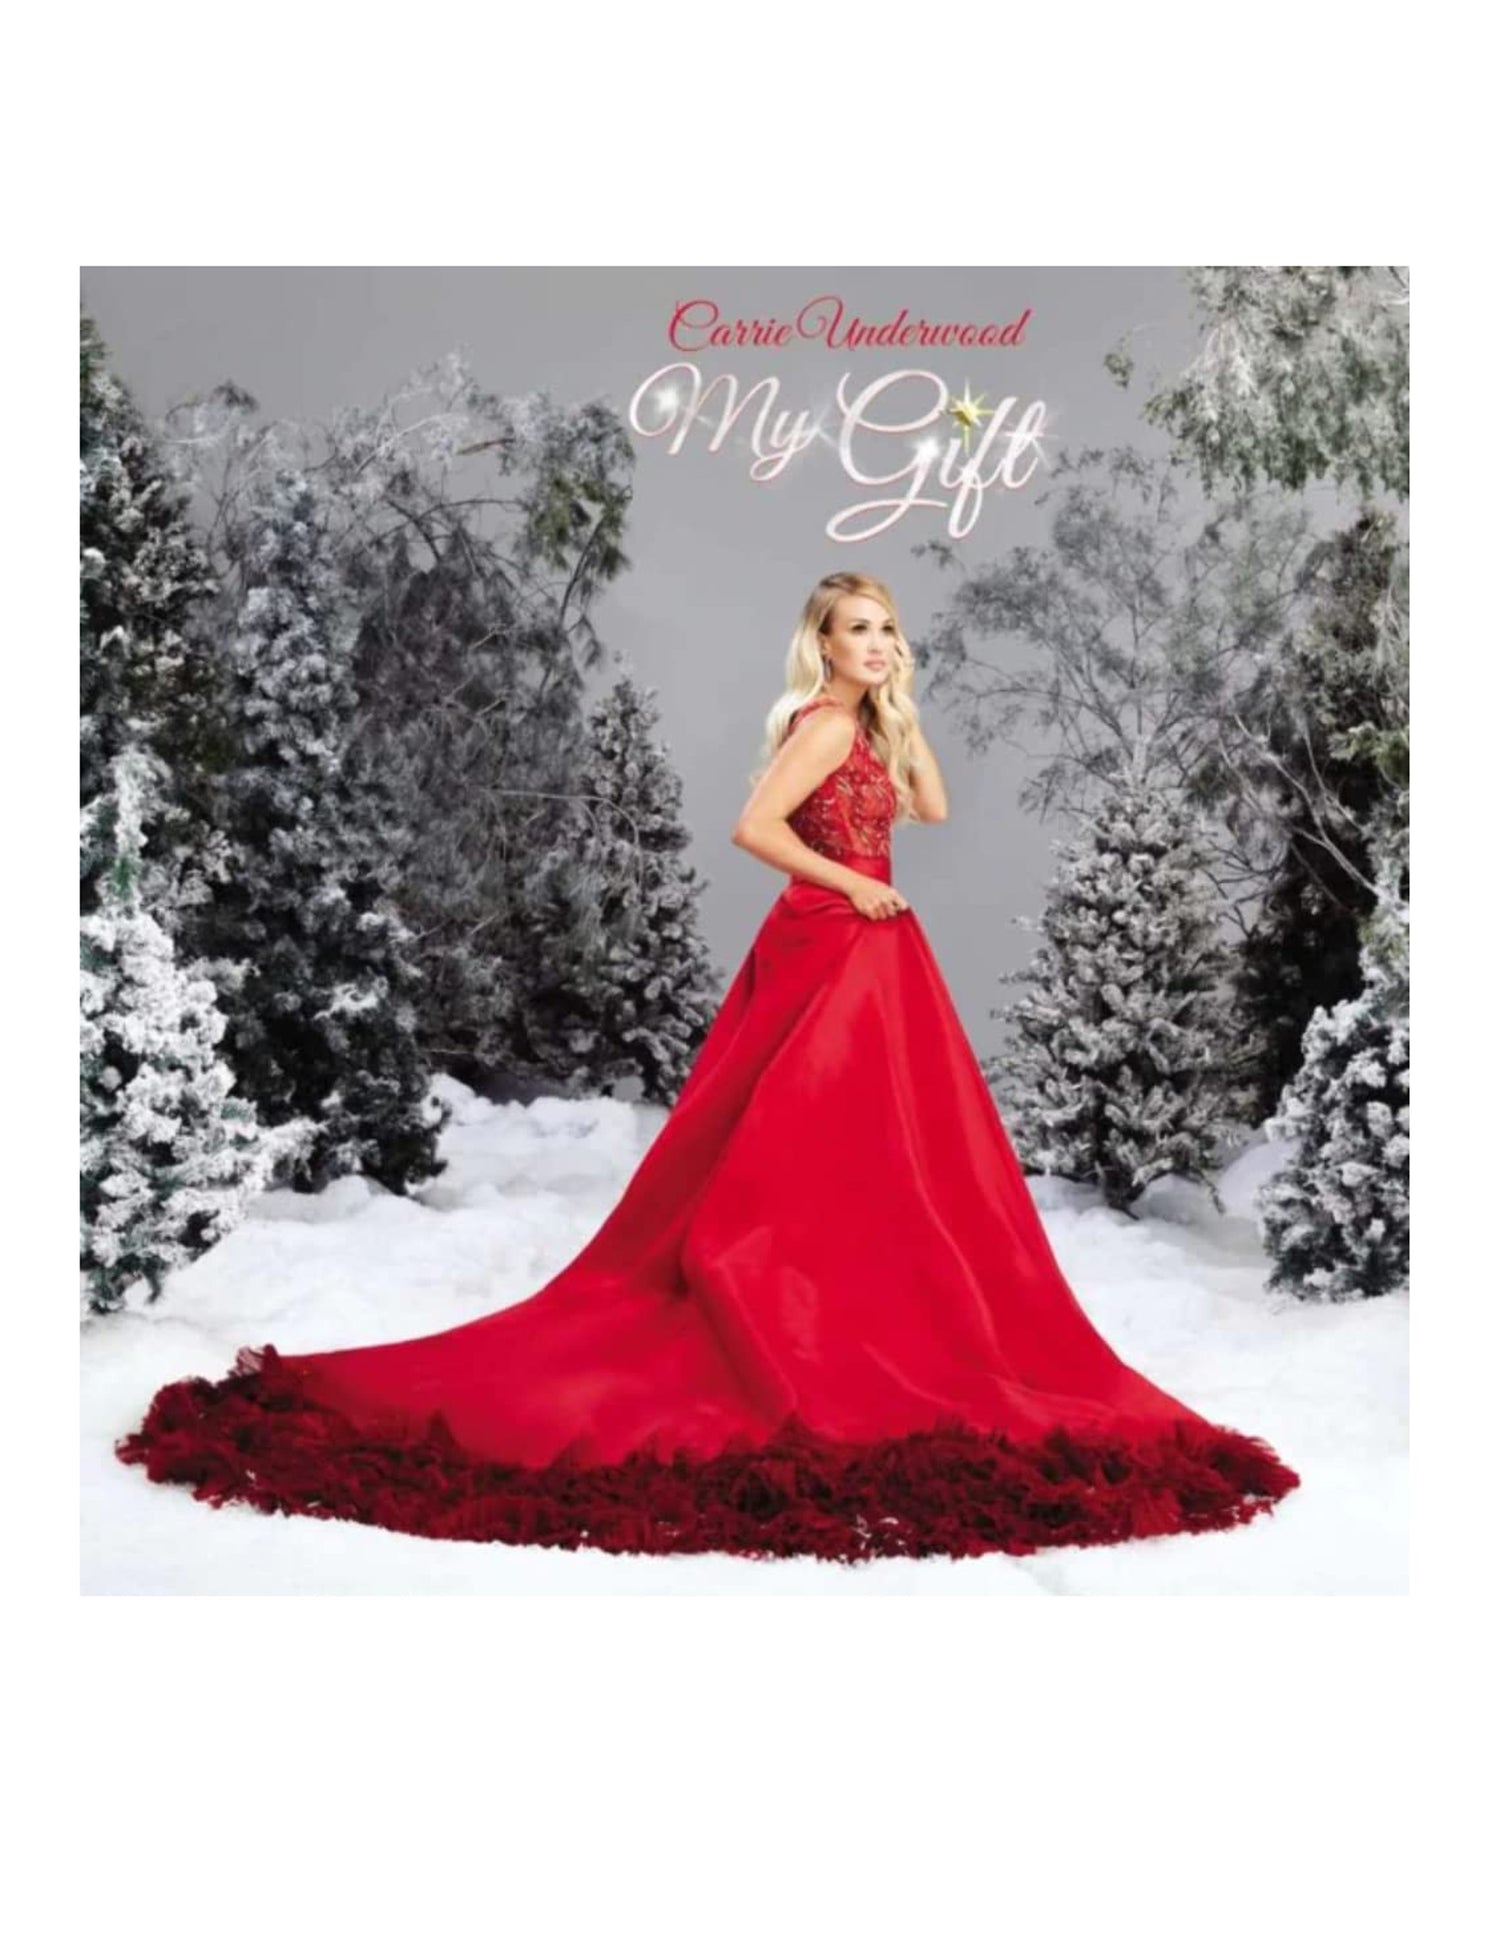 Carrie Underwood: My Gift (CD)